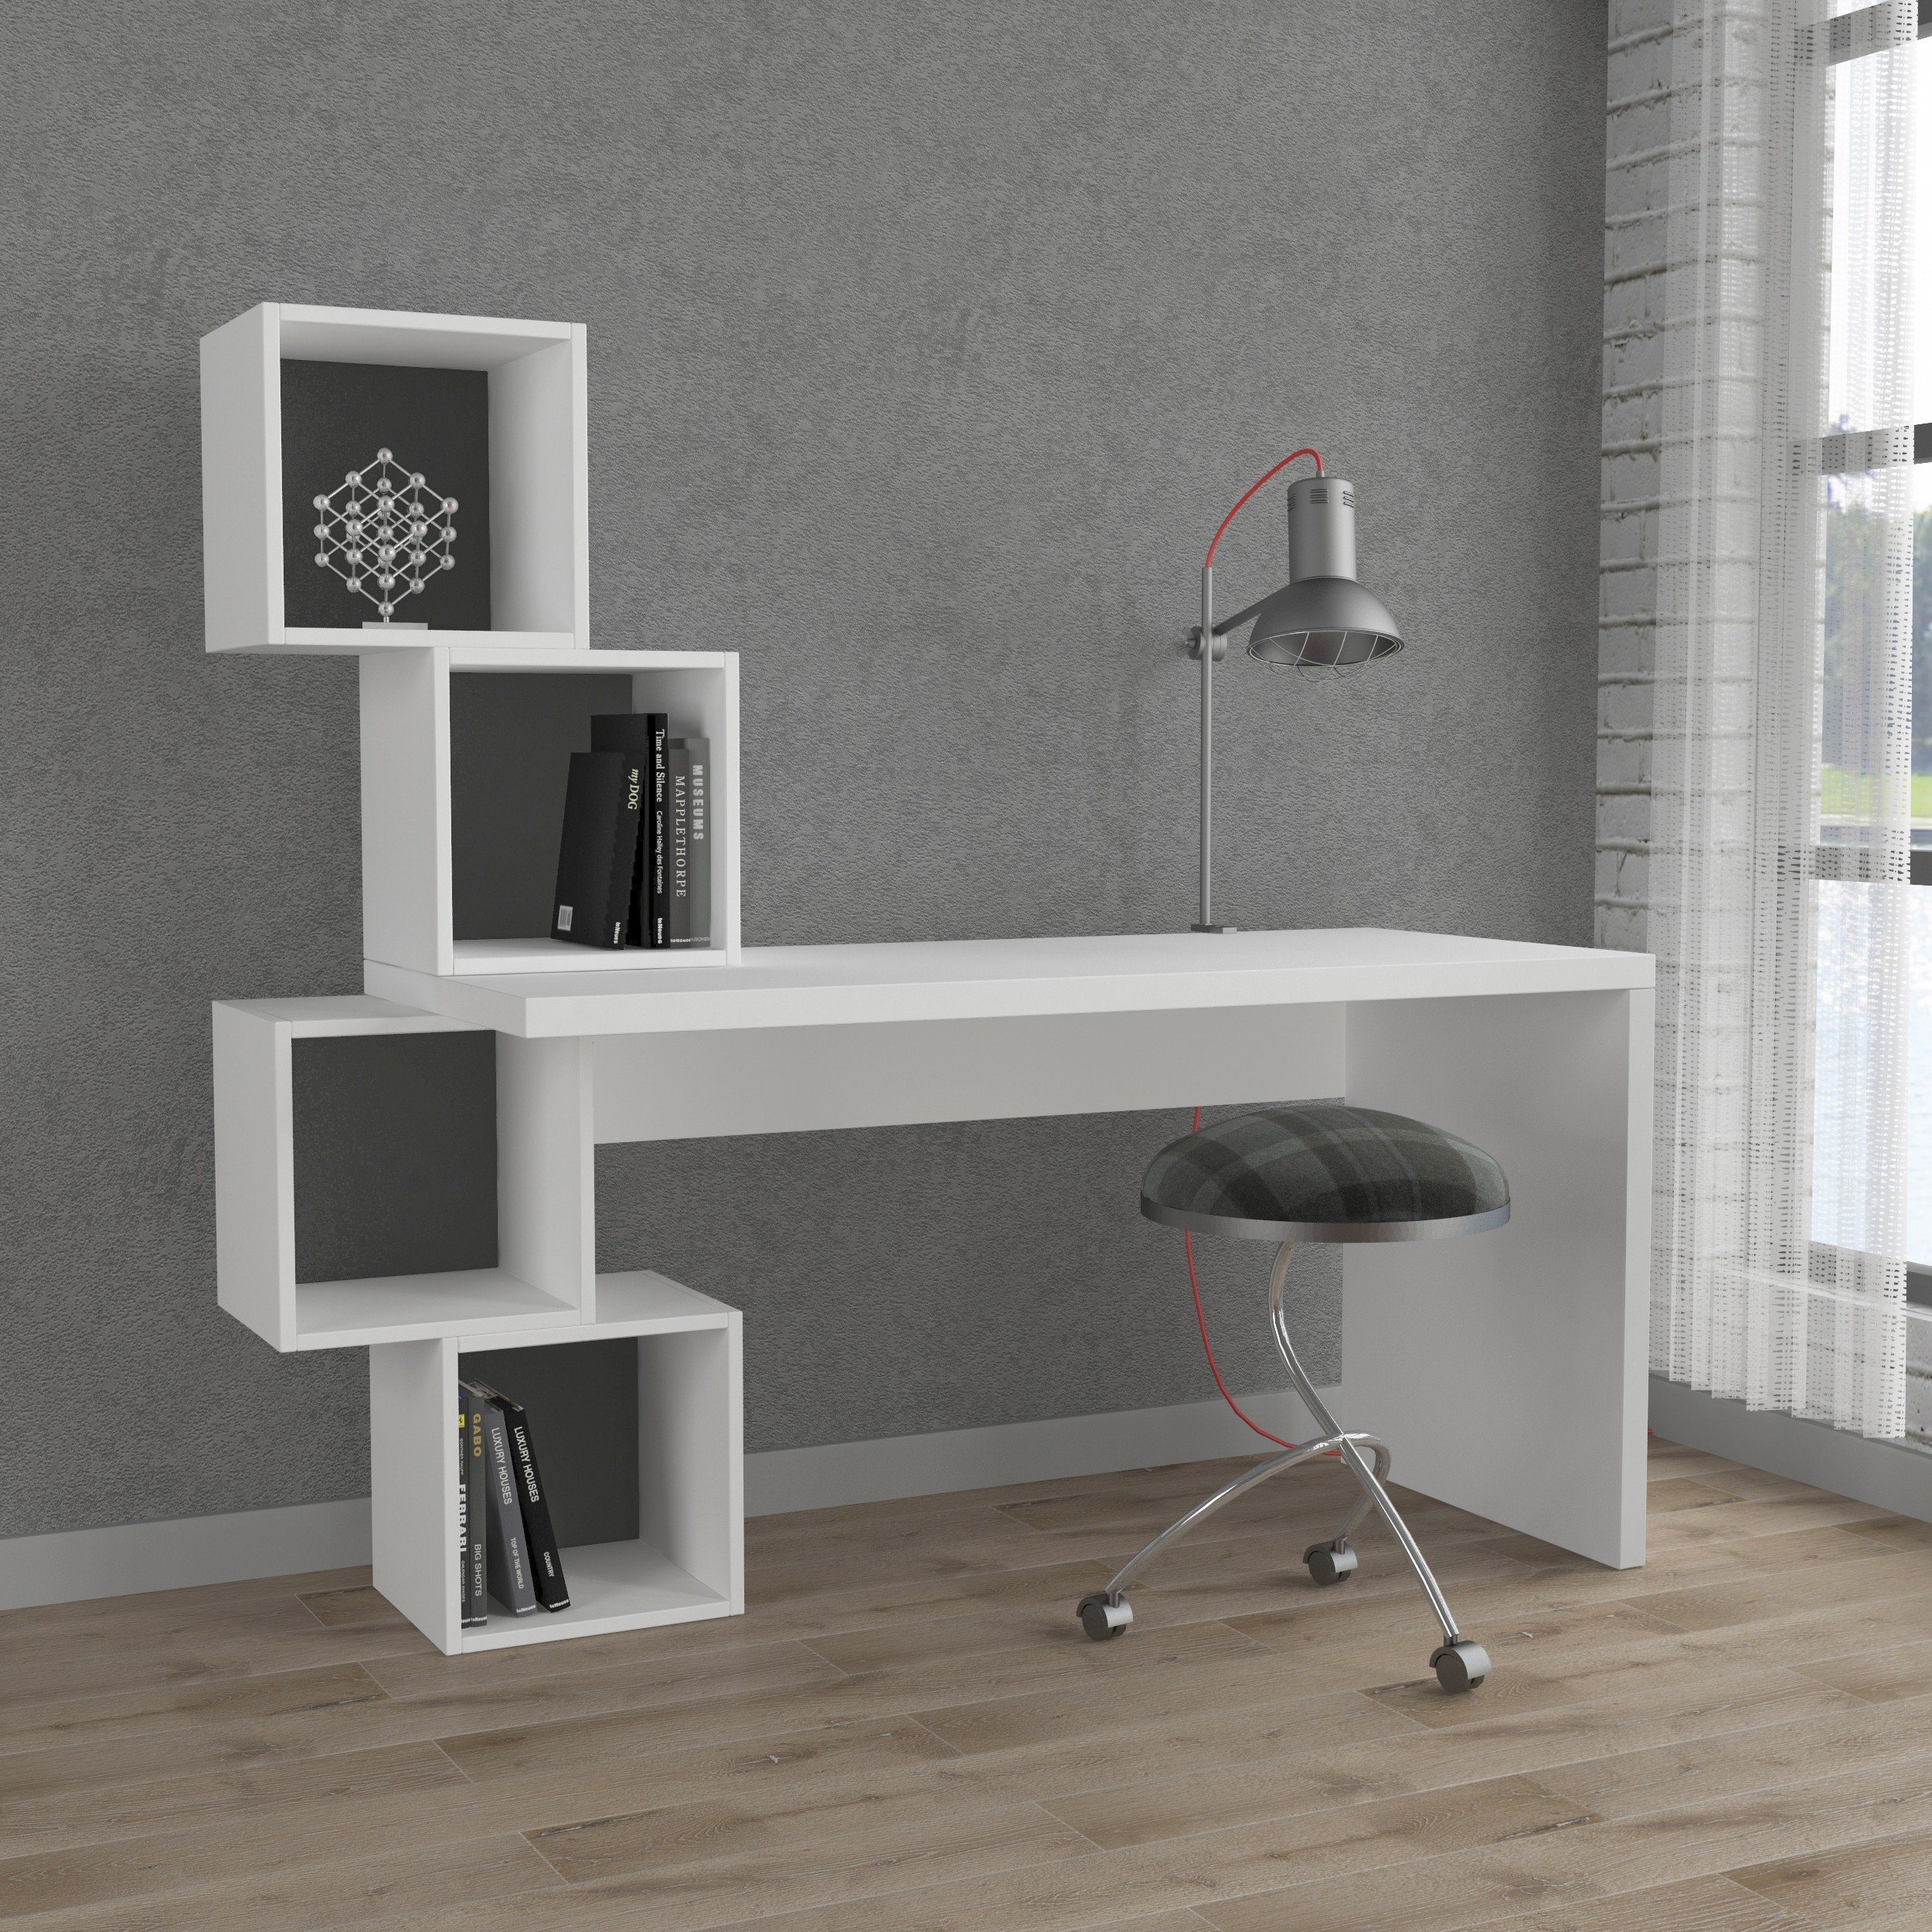 BALANCE WORKING TABLE - WHITE - ANTHRACITE M.MS.10962.5